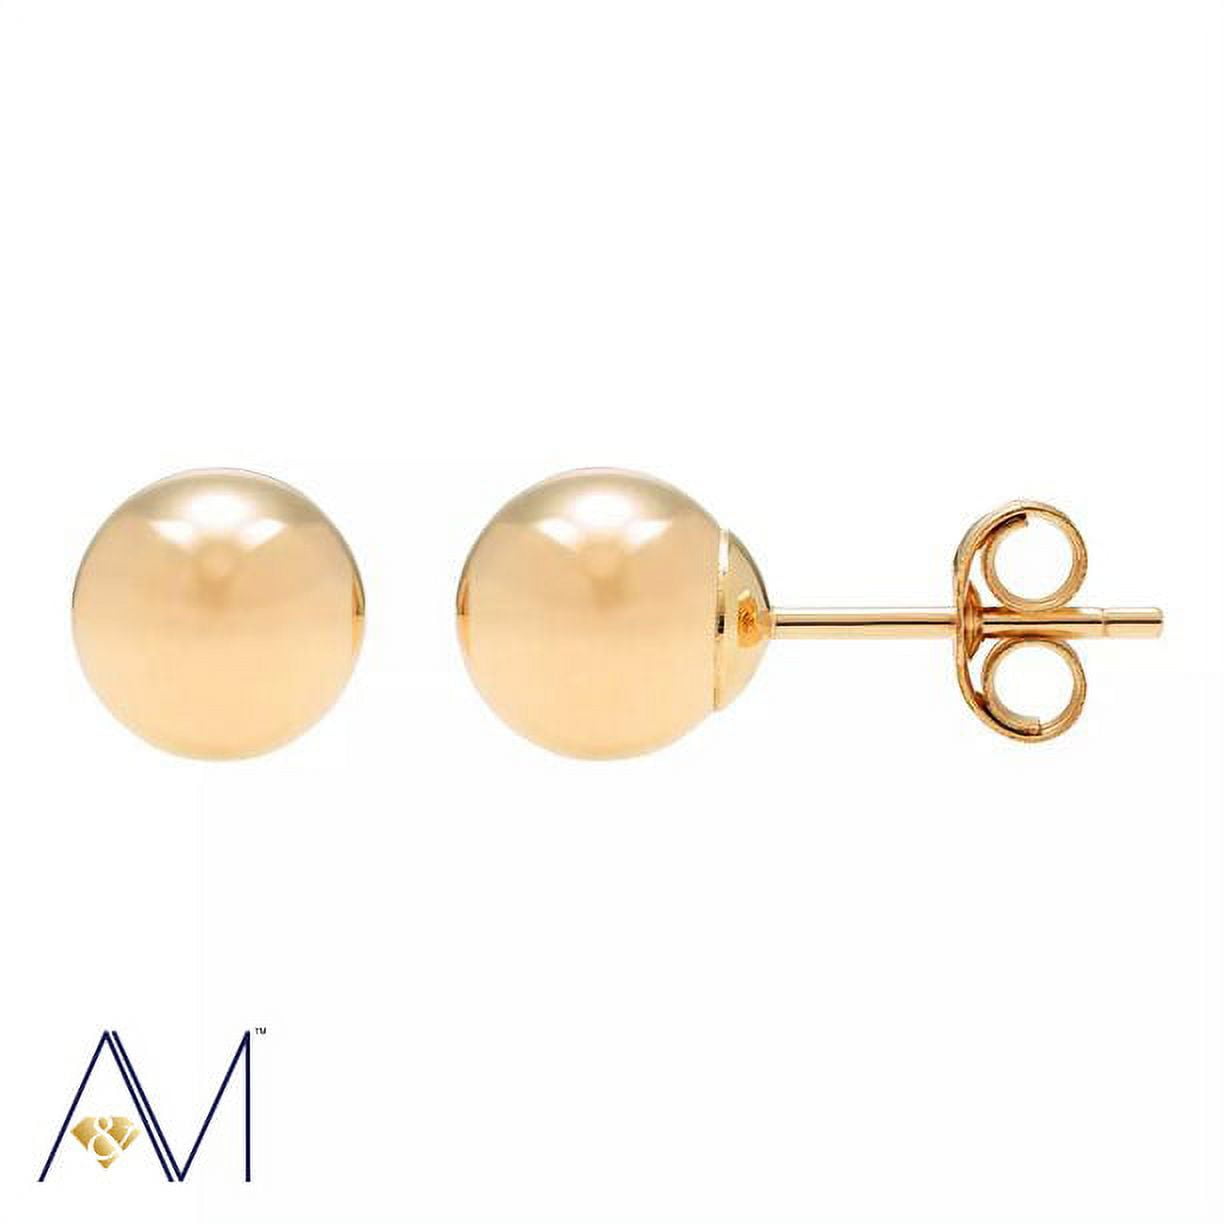 14K Solid Yellow Gold Ball Stud Earrings 7mm